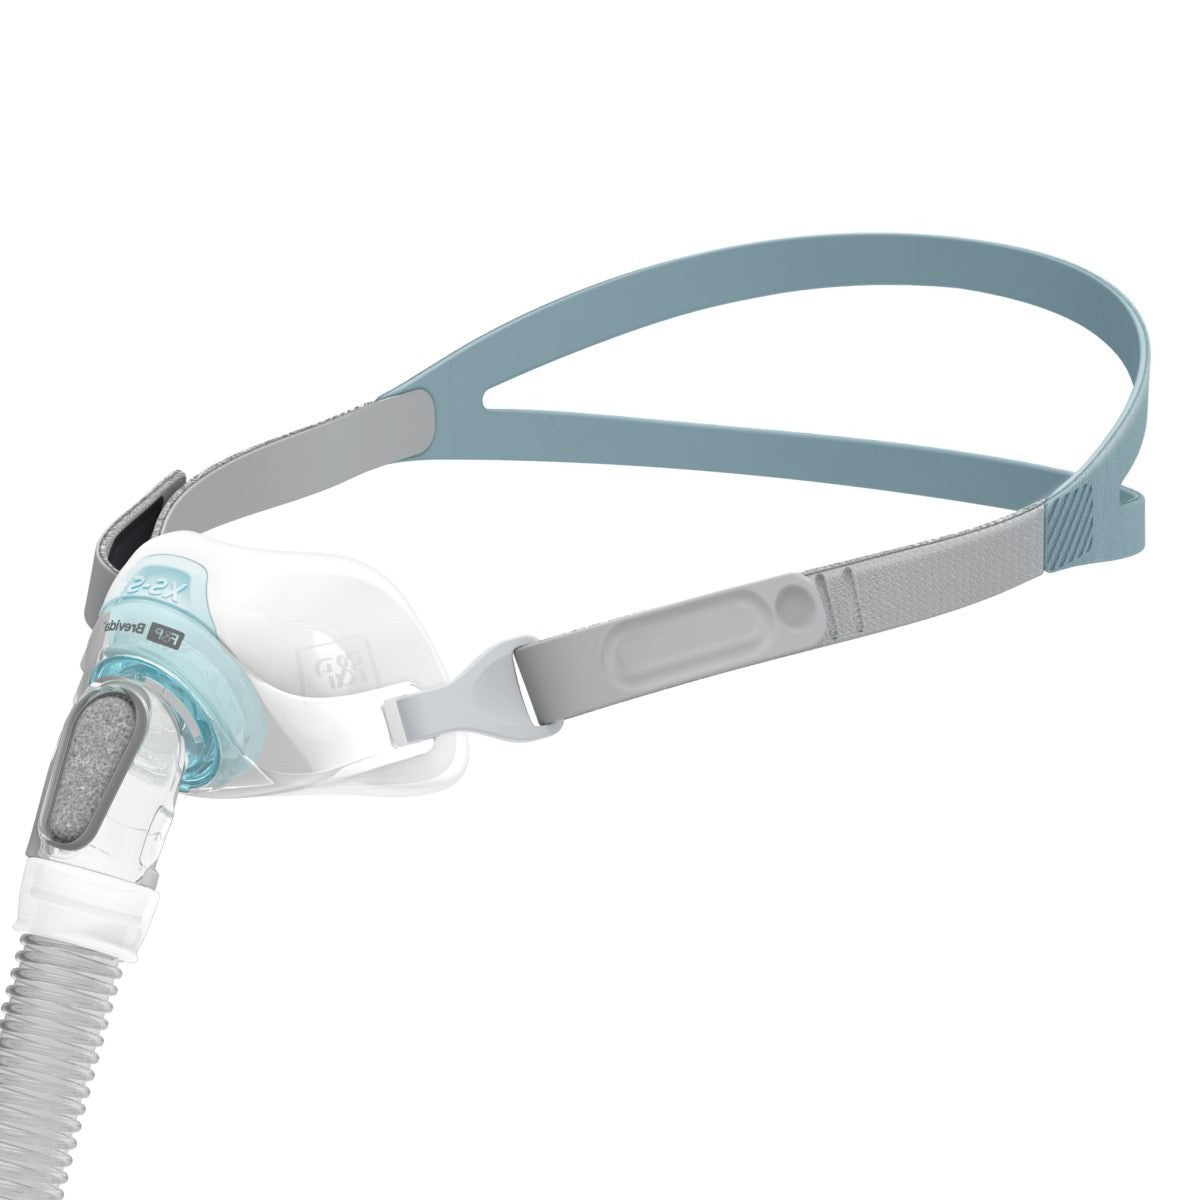 Fisher & Paykel Brevida Nasal Pillow Mask System with Headgear